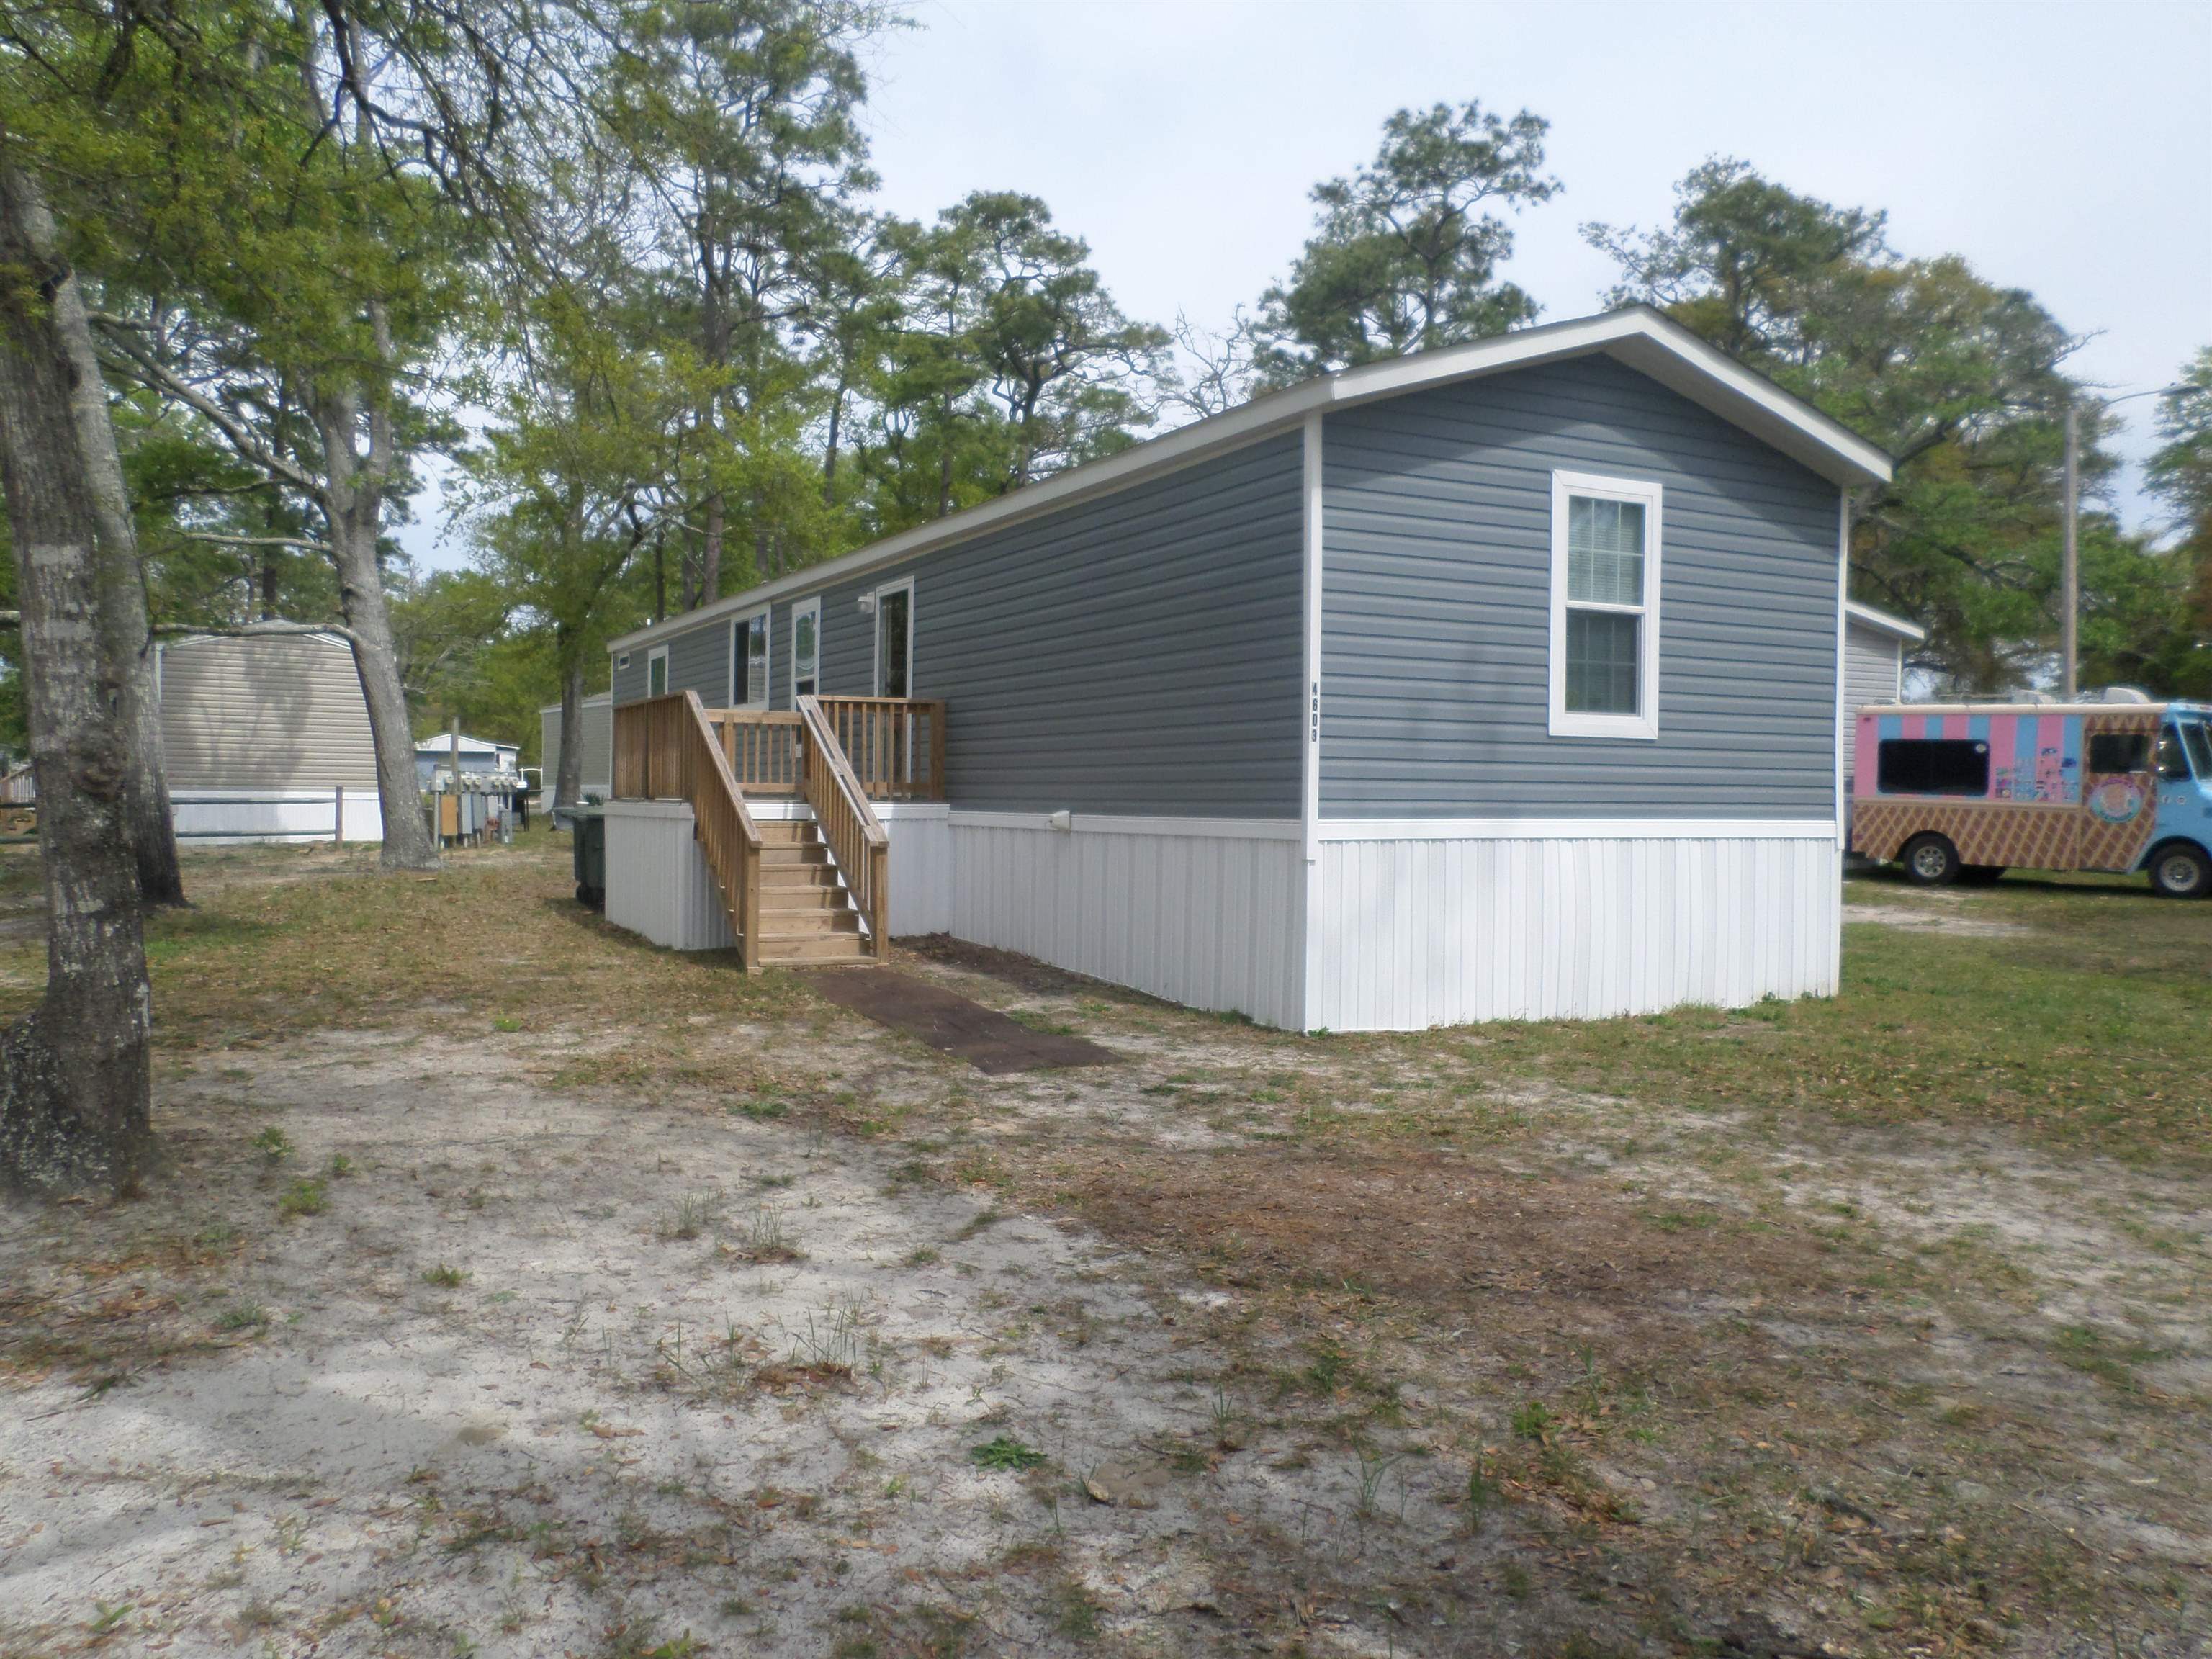 price improvement on this lovely 3 bedroom 2 bath 2023 fleetwood inspiration manufactured home with all furnishings, appliances and decks is set up in the sought after leased land community of creekside north myrtle beach, sc. the large leased lot is shaded by beautiful trees and has plenty of room for additions such as a storage building or fencing.  this home is top of the line with sheetrock walls, ceiling fans, upgraded cabinetry and hardware, island bar, large master bedroom with walk in closet and dual porcelain master bathroom sinks.  the linoleum flooring is easily maintained and flows beautifully throughout the home.  the furniture and color patterns catch your eyes as you enter the home and will remain as a part of the sale.  the community offers a large swimming pool for residents and guests, onsite mail boxes, clubhouse with playground and picnic area, seating benches on the marsh of cherry grove. 1000 gallons of water, trash pick up and common area maintenance is included in the lot leasing fee. the home may be used as a primary residence or vacation property. it has everything you will need to move right in including new bedroom sets, kitchen supplies including utensils, dishes, pots, coffee makers, blender, sheets, towels, etc.   come grab your piece of paradise in a well maintained community.  creekside is close to the intracoastal waterway and only minutes to the beautiful atlantic ocean in the cherry grove section of north myrtle beach, sc. golf carts, motorcycles, and pets are allowed and must be approved by management upon land leasing. call for further details and to view this immaculately maintained home.  a must see today.